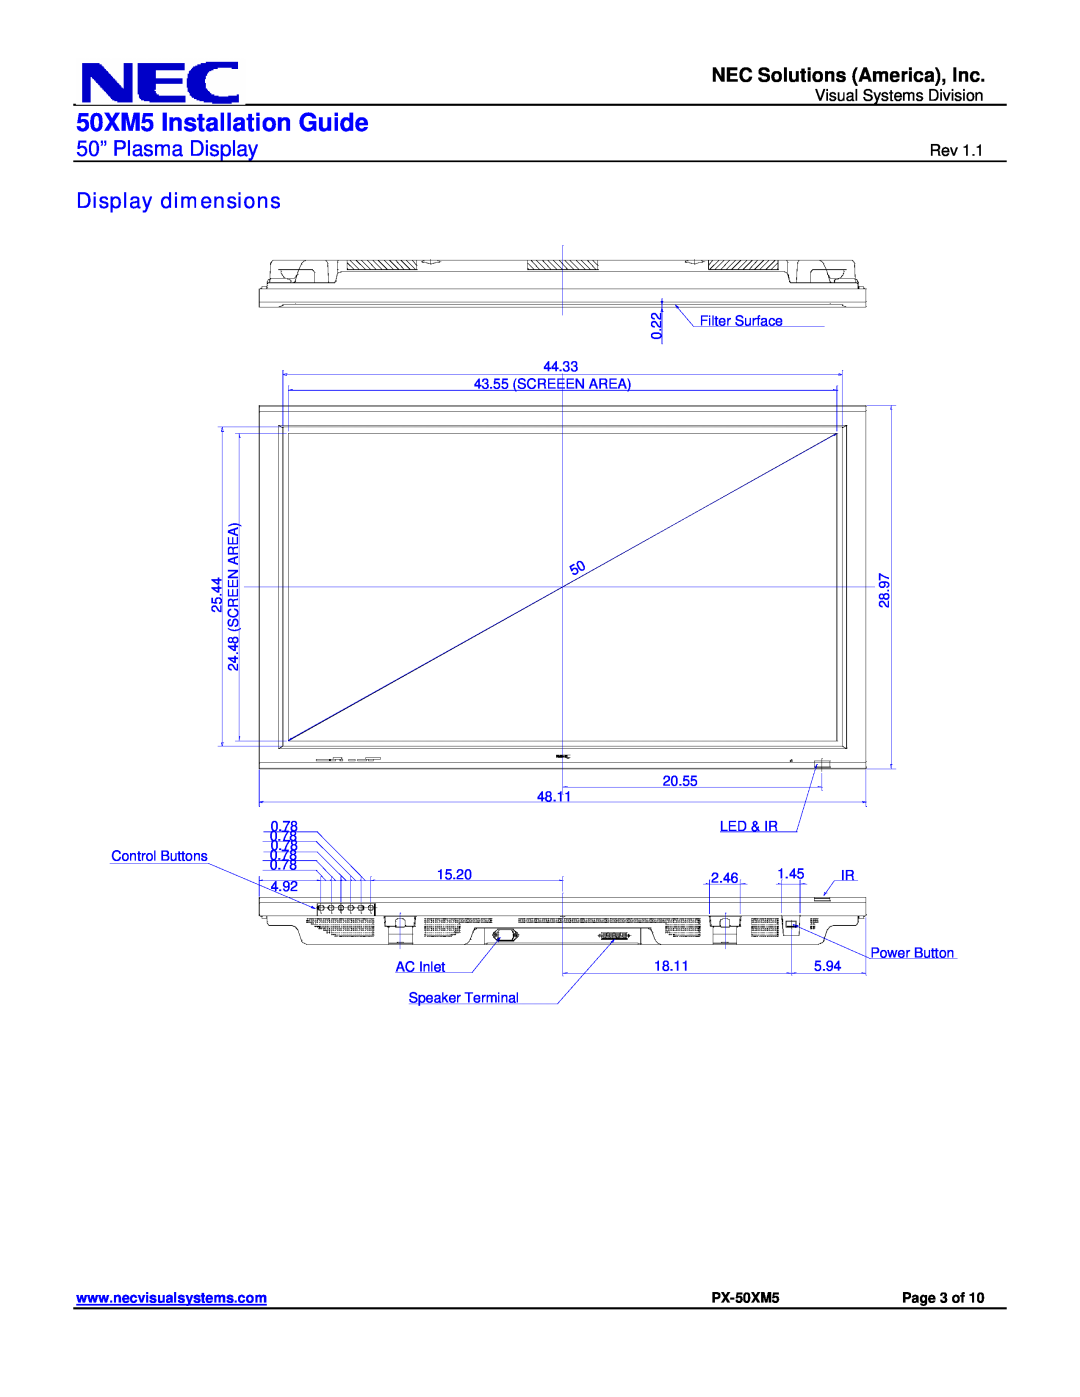 NEC Display dimensions, 50XM5 Installation Guide, 50” Plasma Display, NEC Solutions America, Inc, PX-50XM5, Page 3 of 